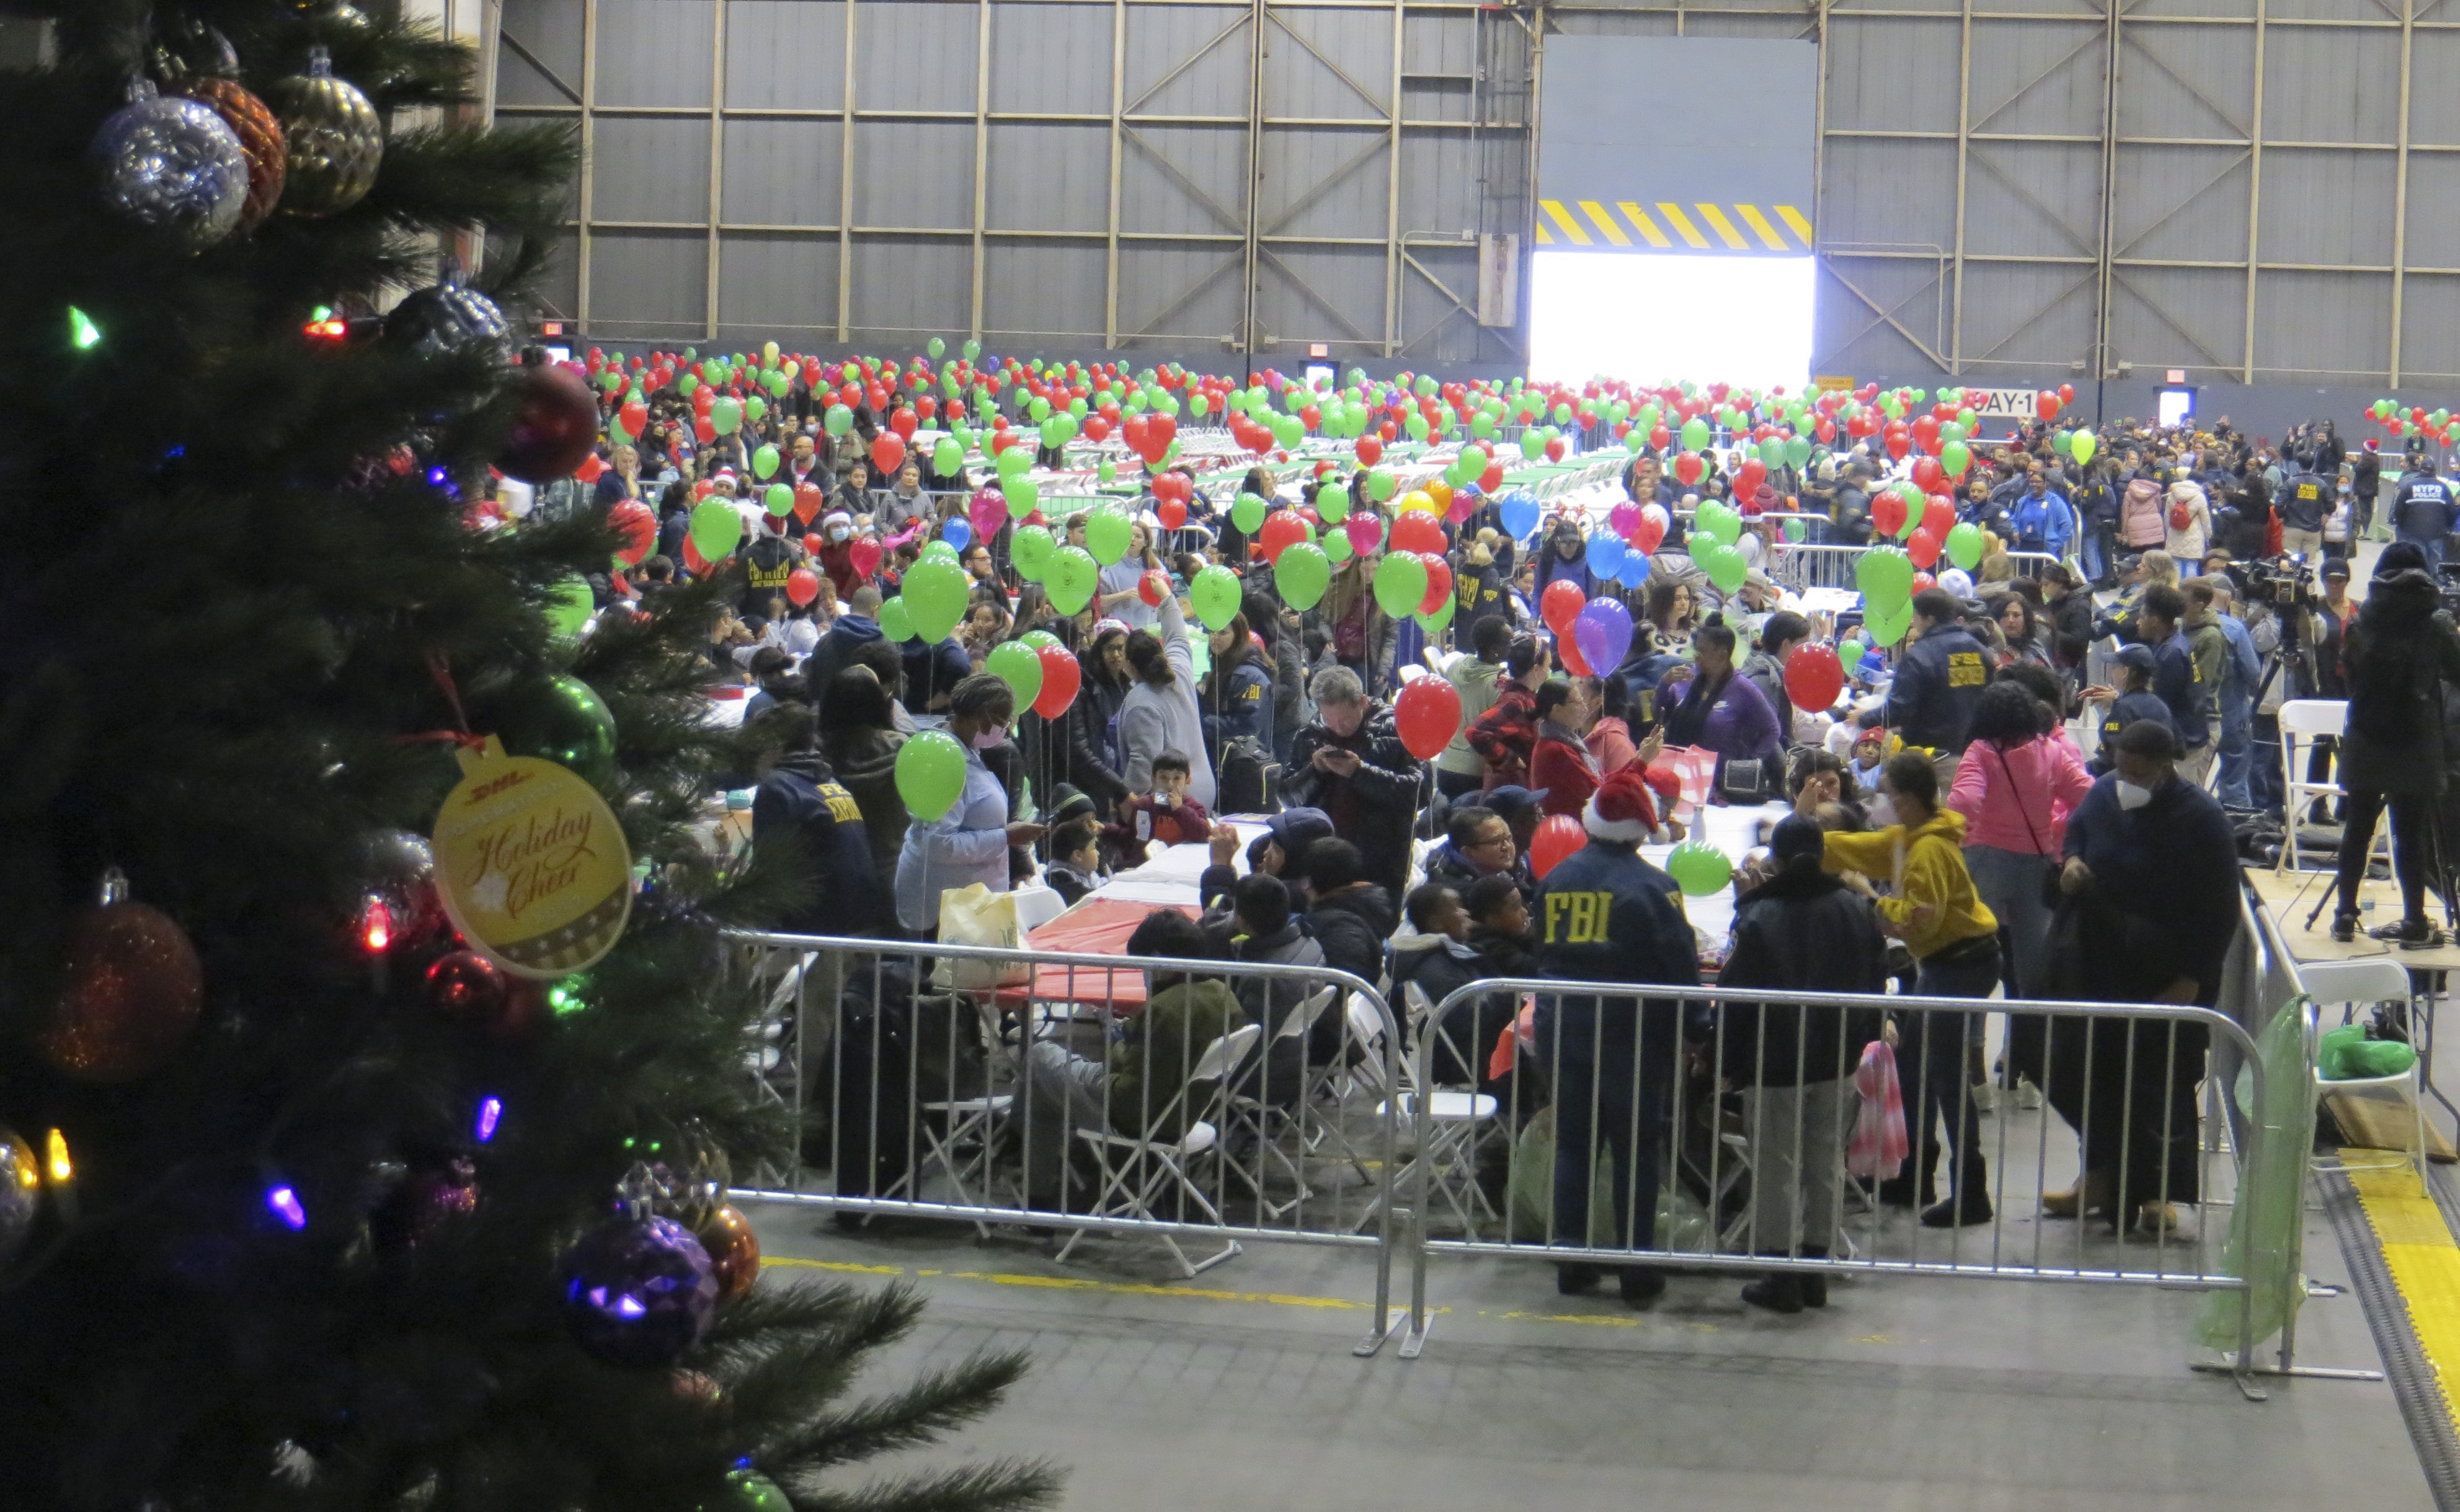 A view of Operation Santa from the cockpit of a Delta Air Lines plane parked in a hangar at John F. Kennedy International Airport (JFK). (Photo courtesy of TSA JFK)